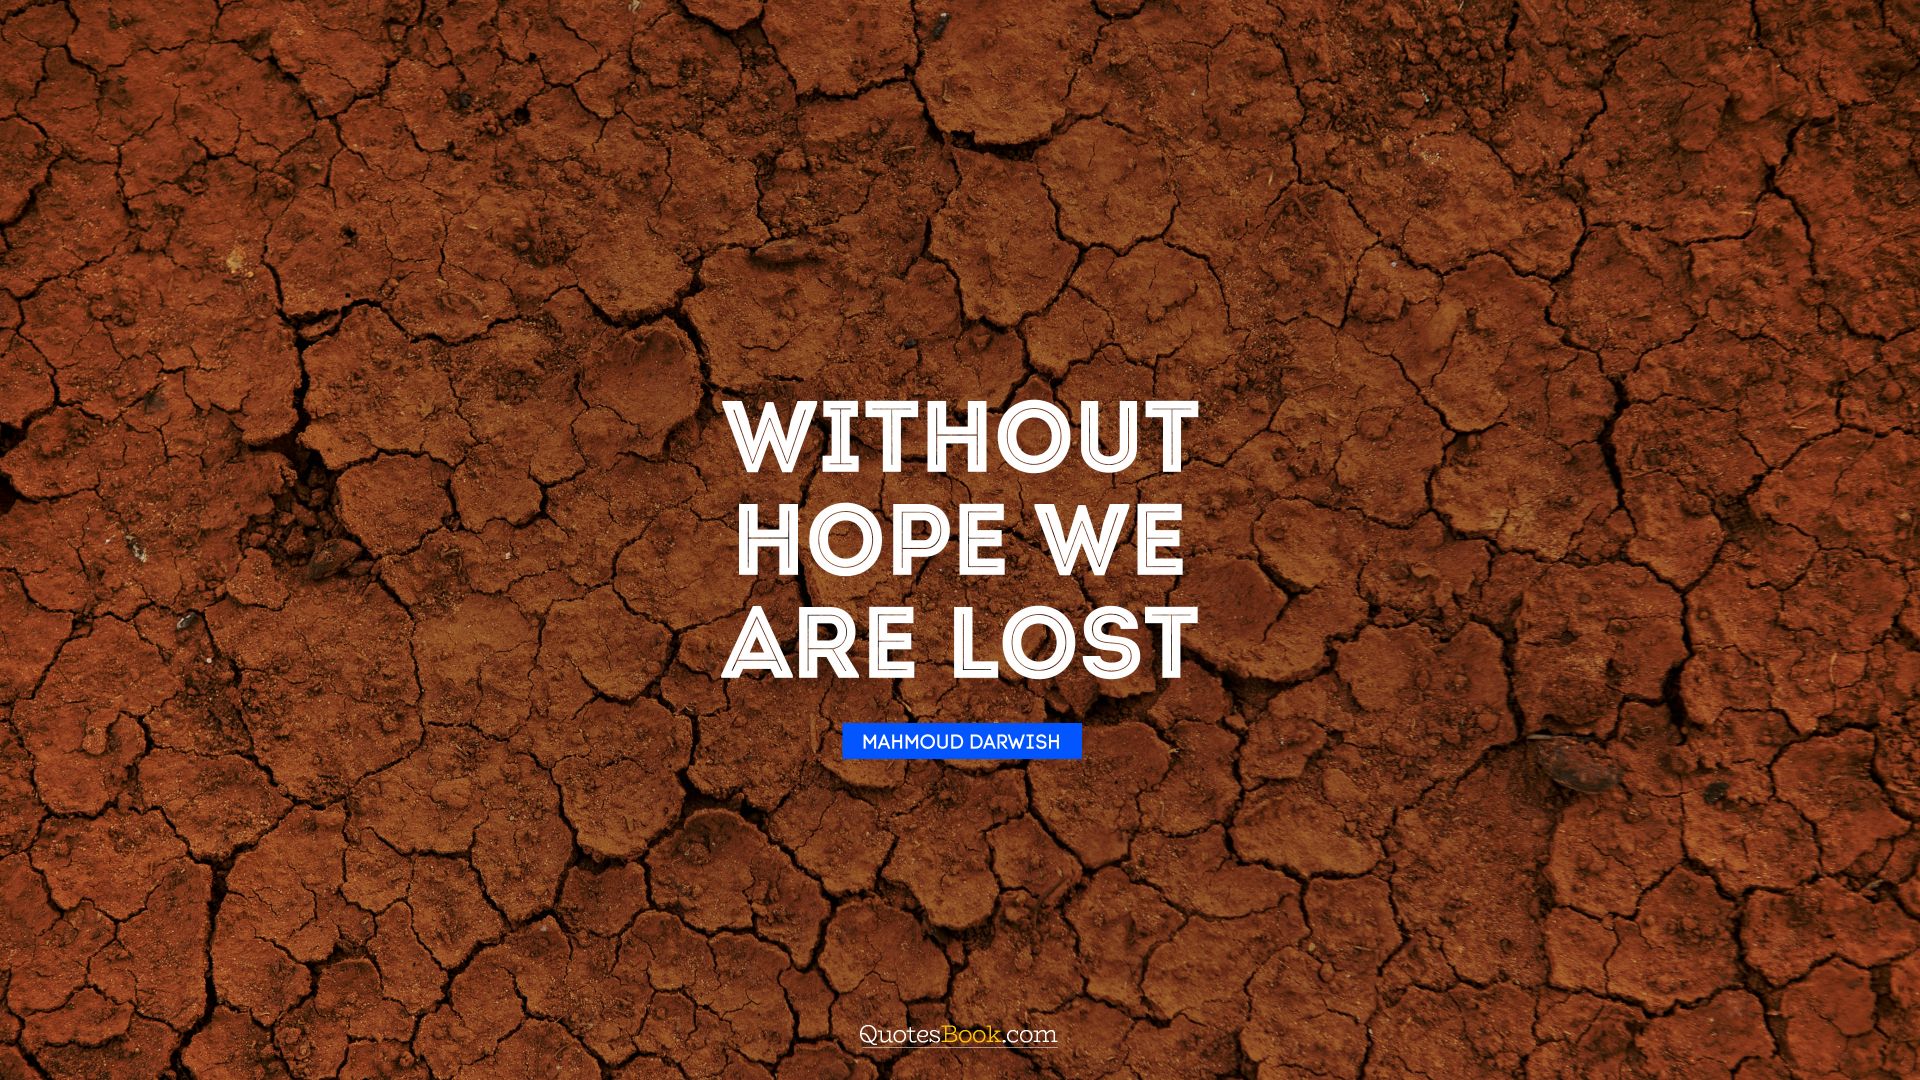 Without hope we are lost. - Quote by Mahmoud Darwish